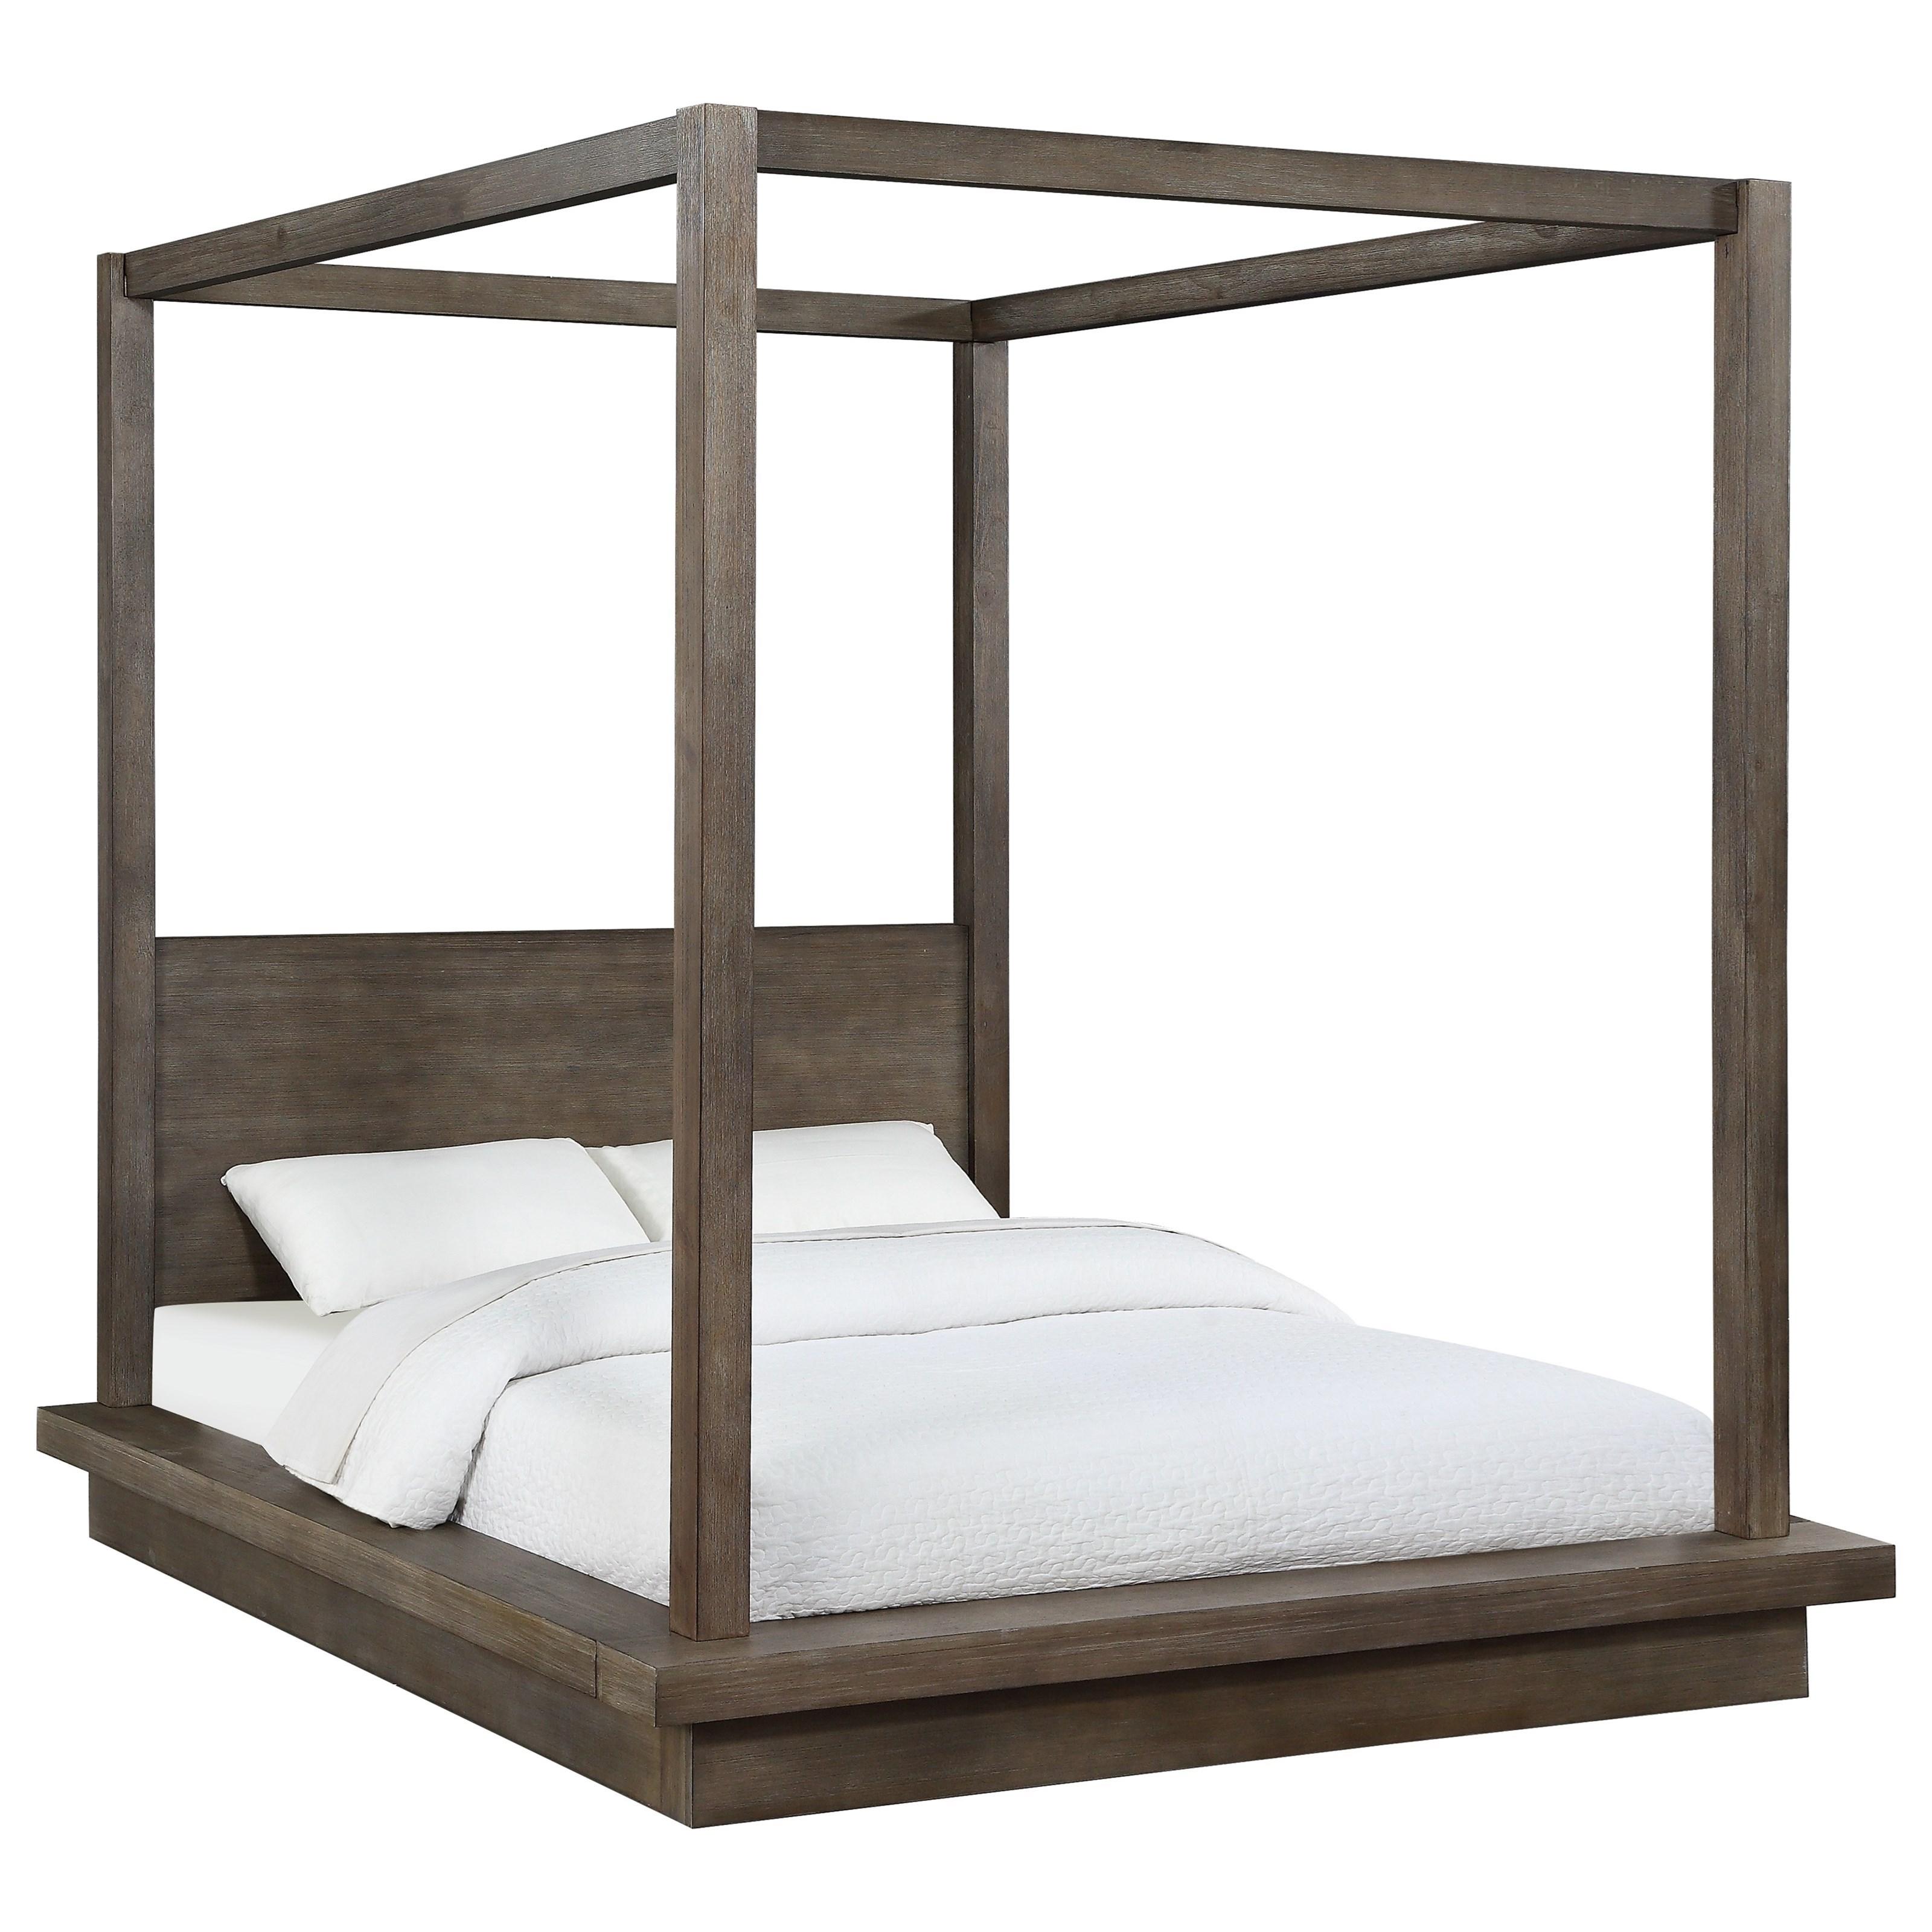 Contemporary, Rustic Canopy Bed MELBOURNE CANOPY 8D64F5 in Brown 